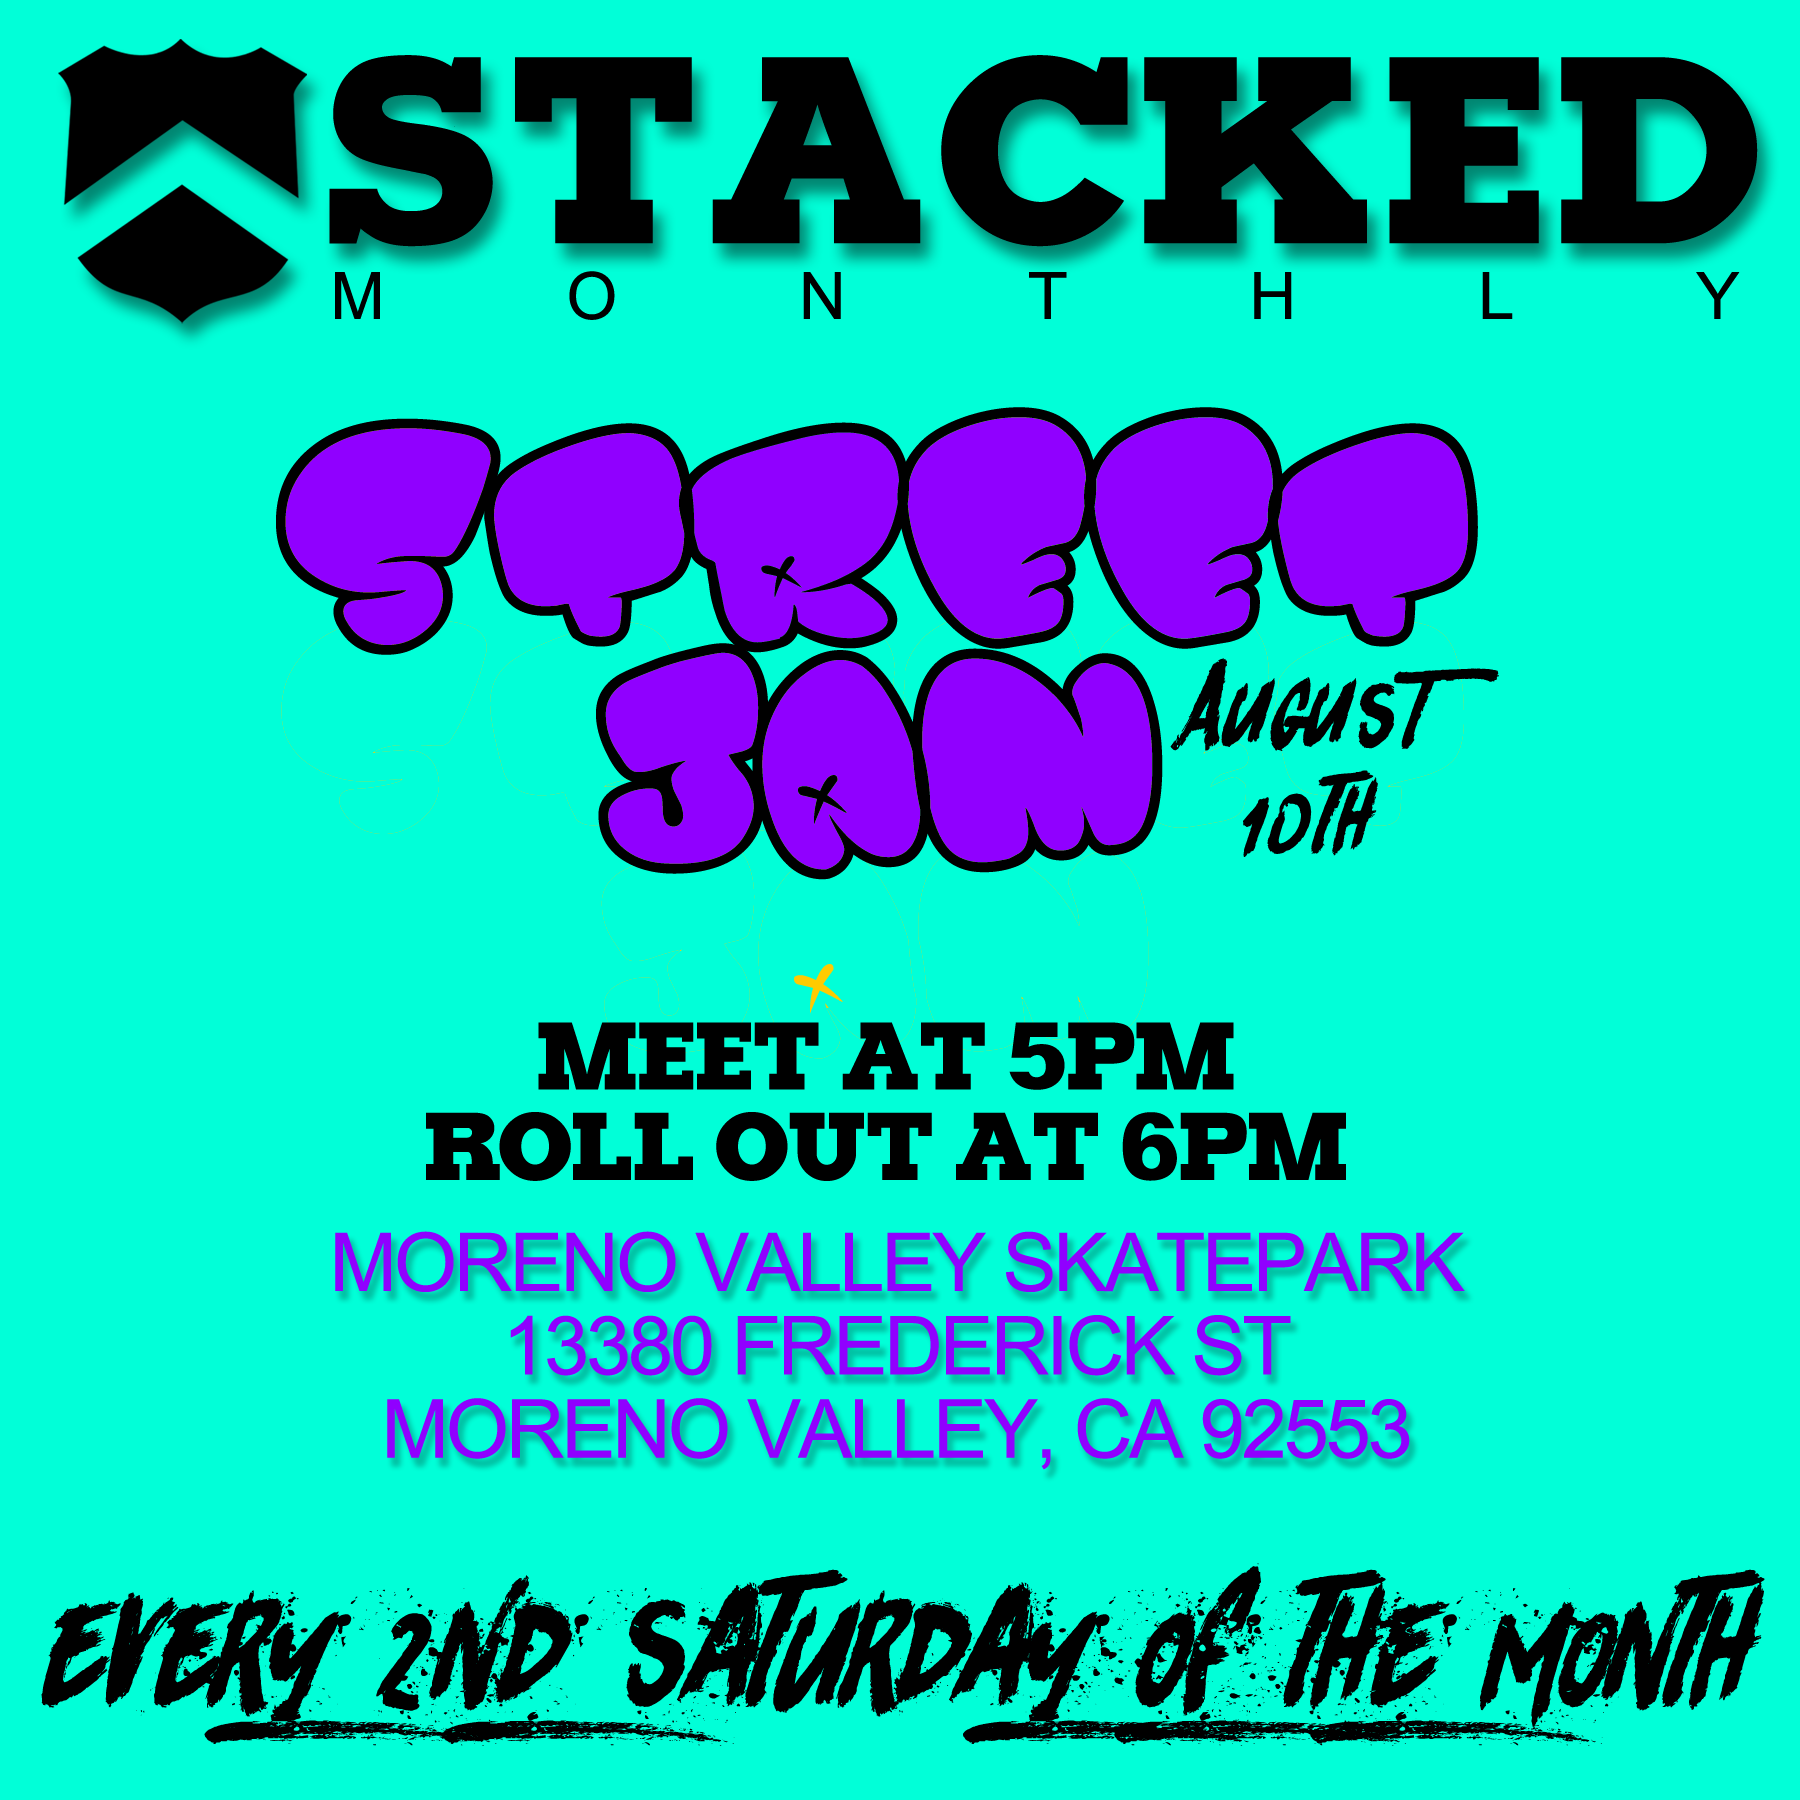 Stacked Monthly Street Jam - August 10th 2019 at 5pm